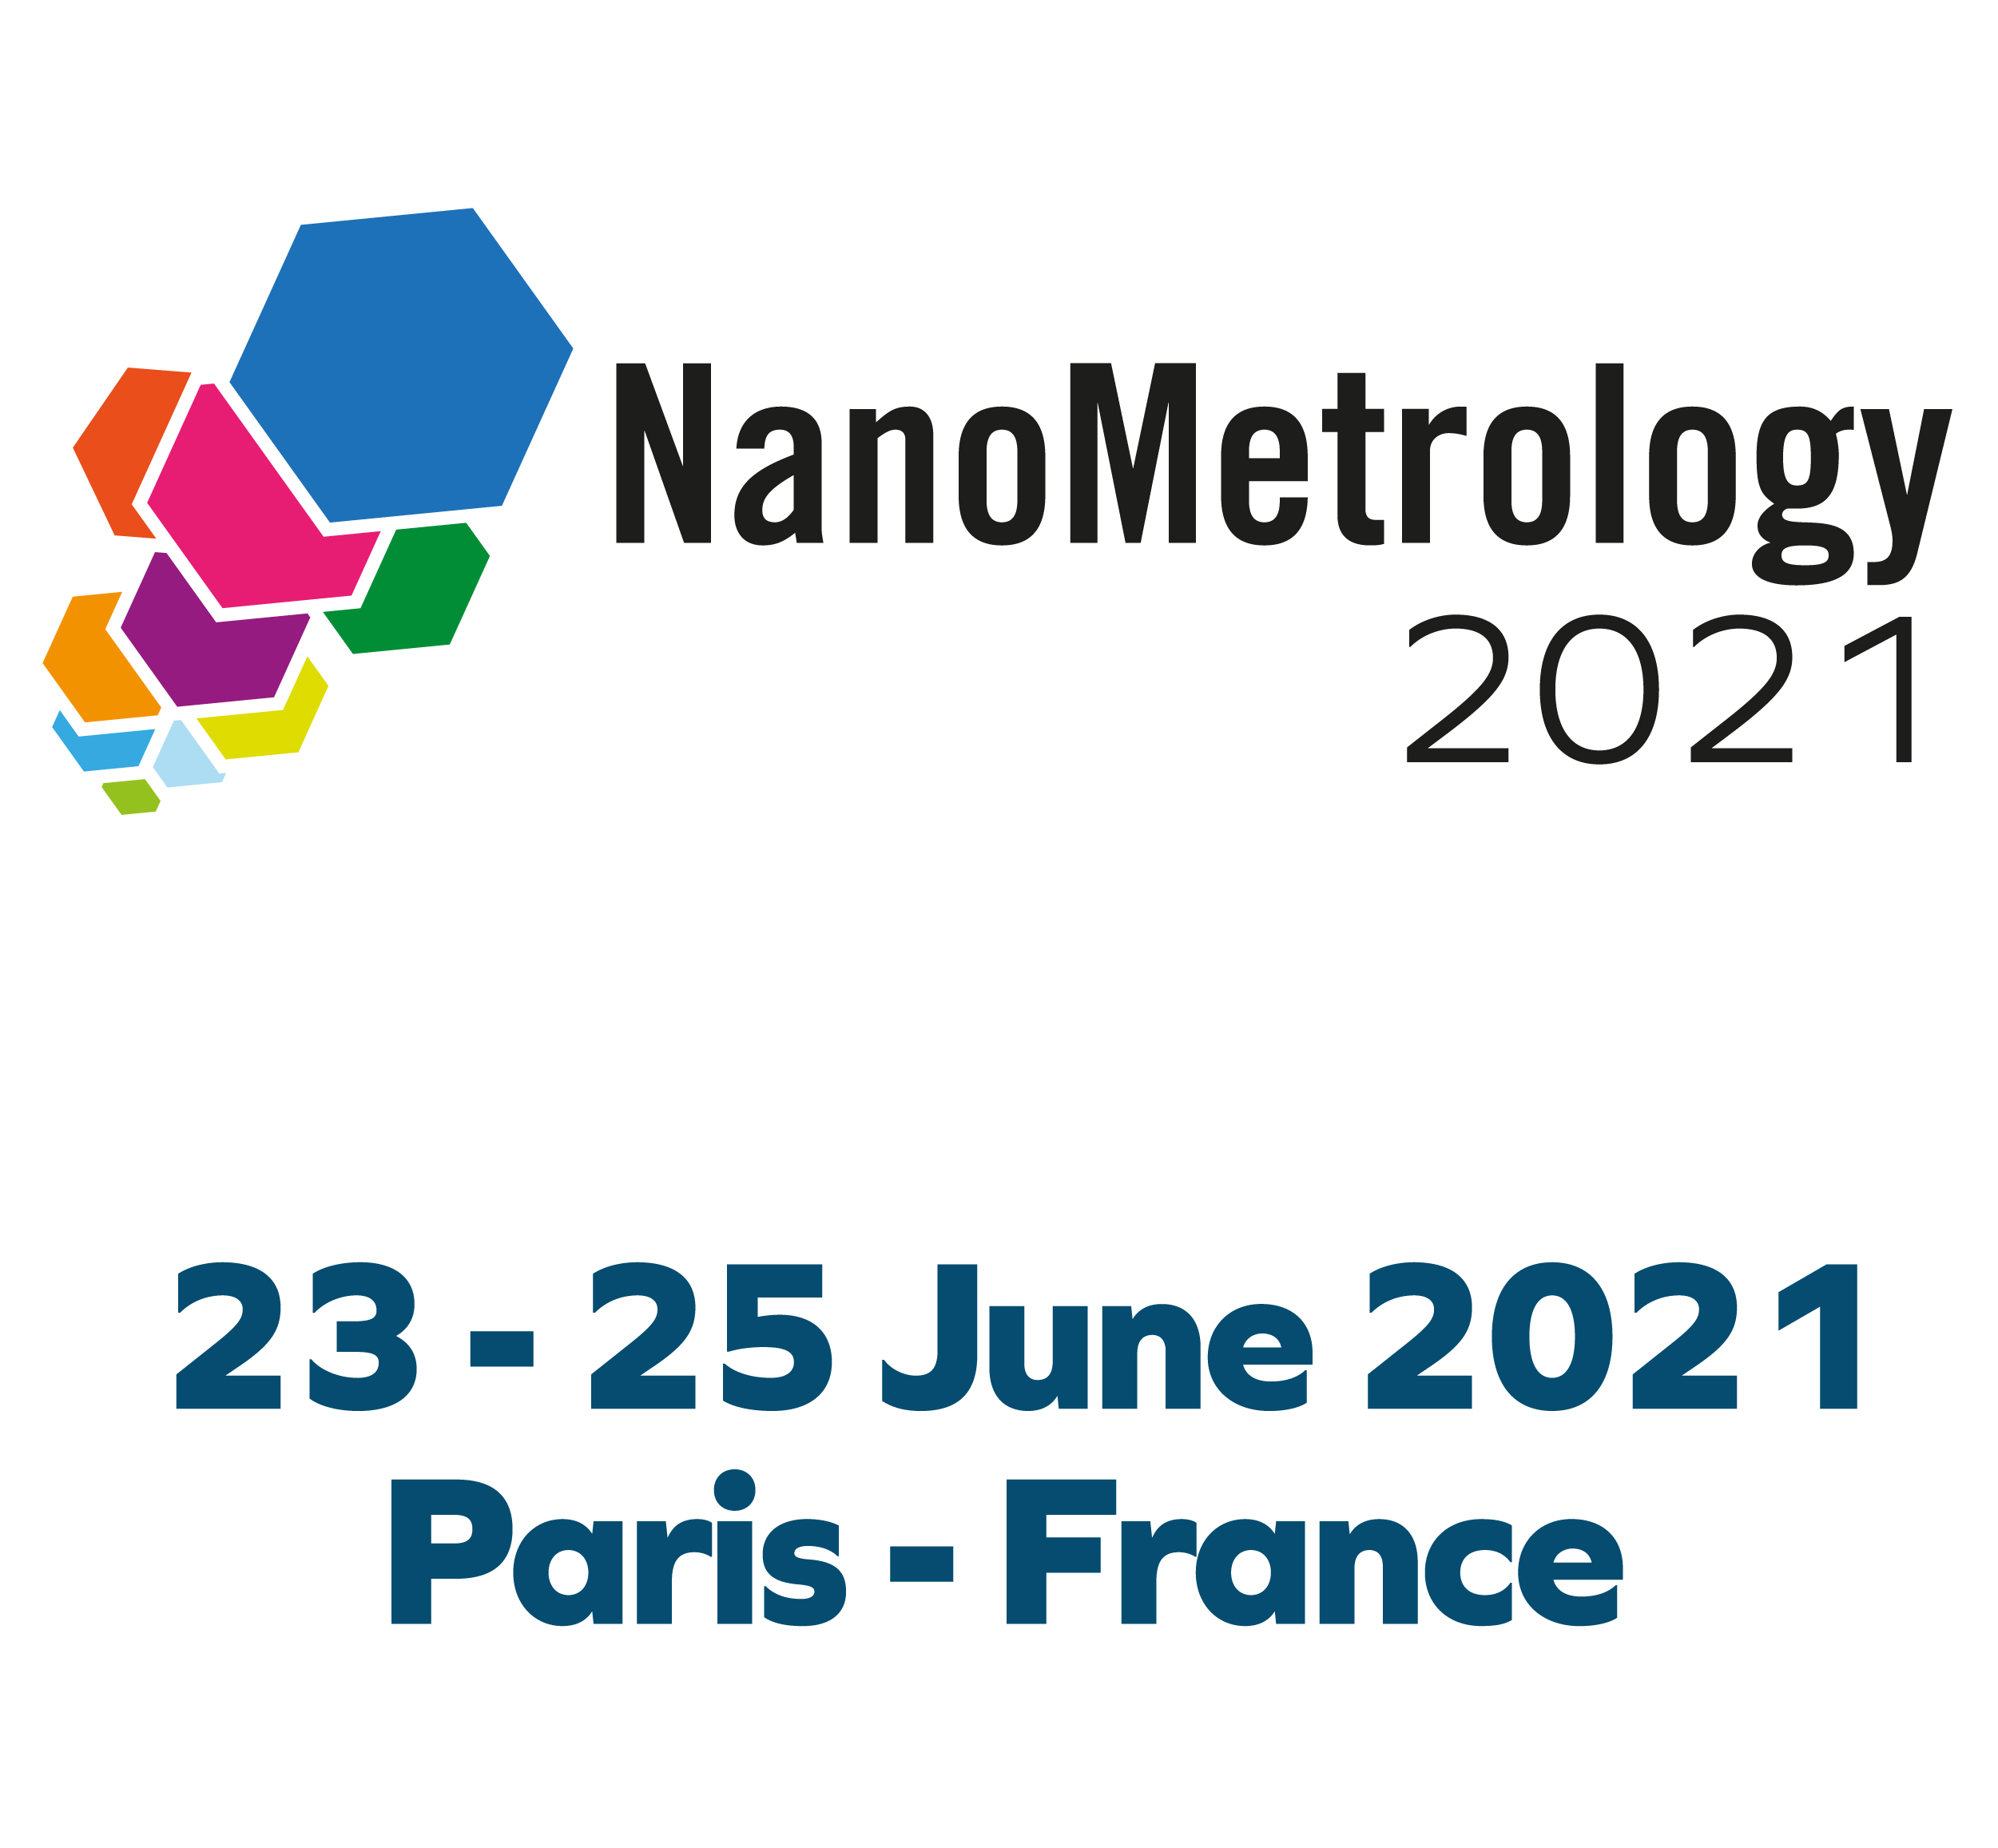 The 6th edition of NanoMetrology 2021 International Conference